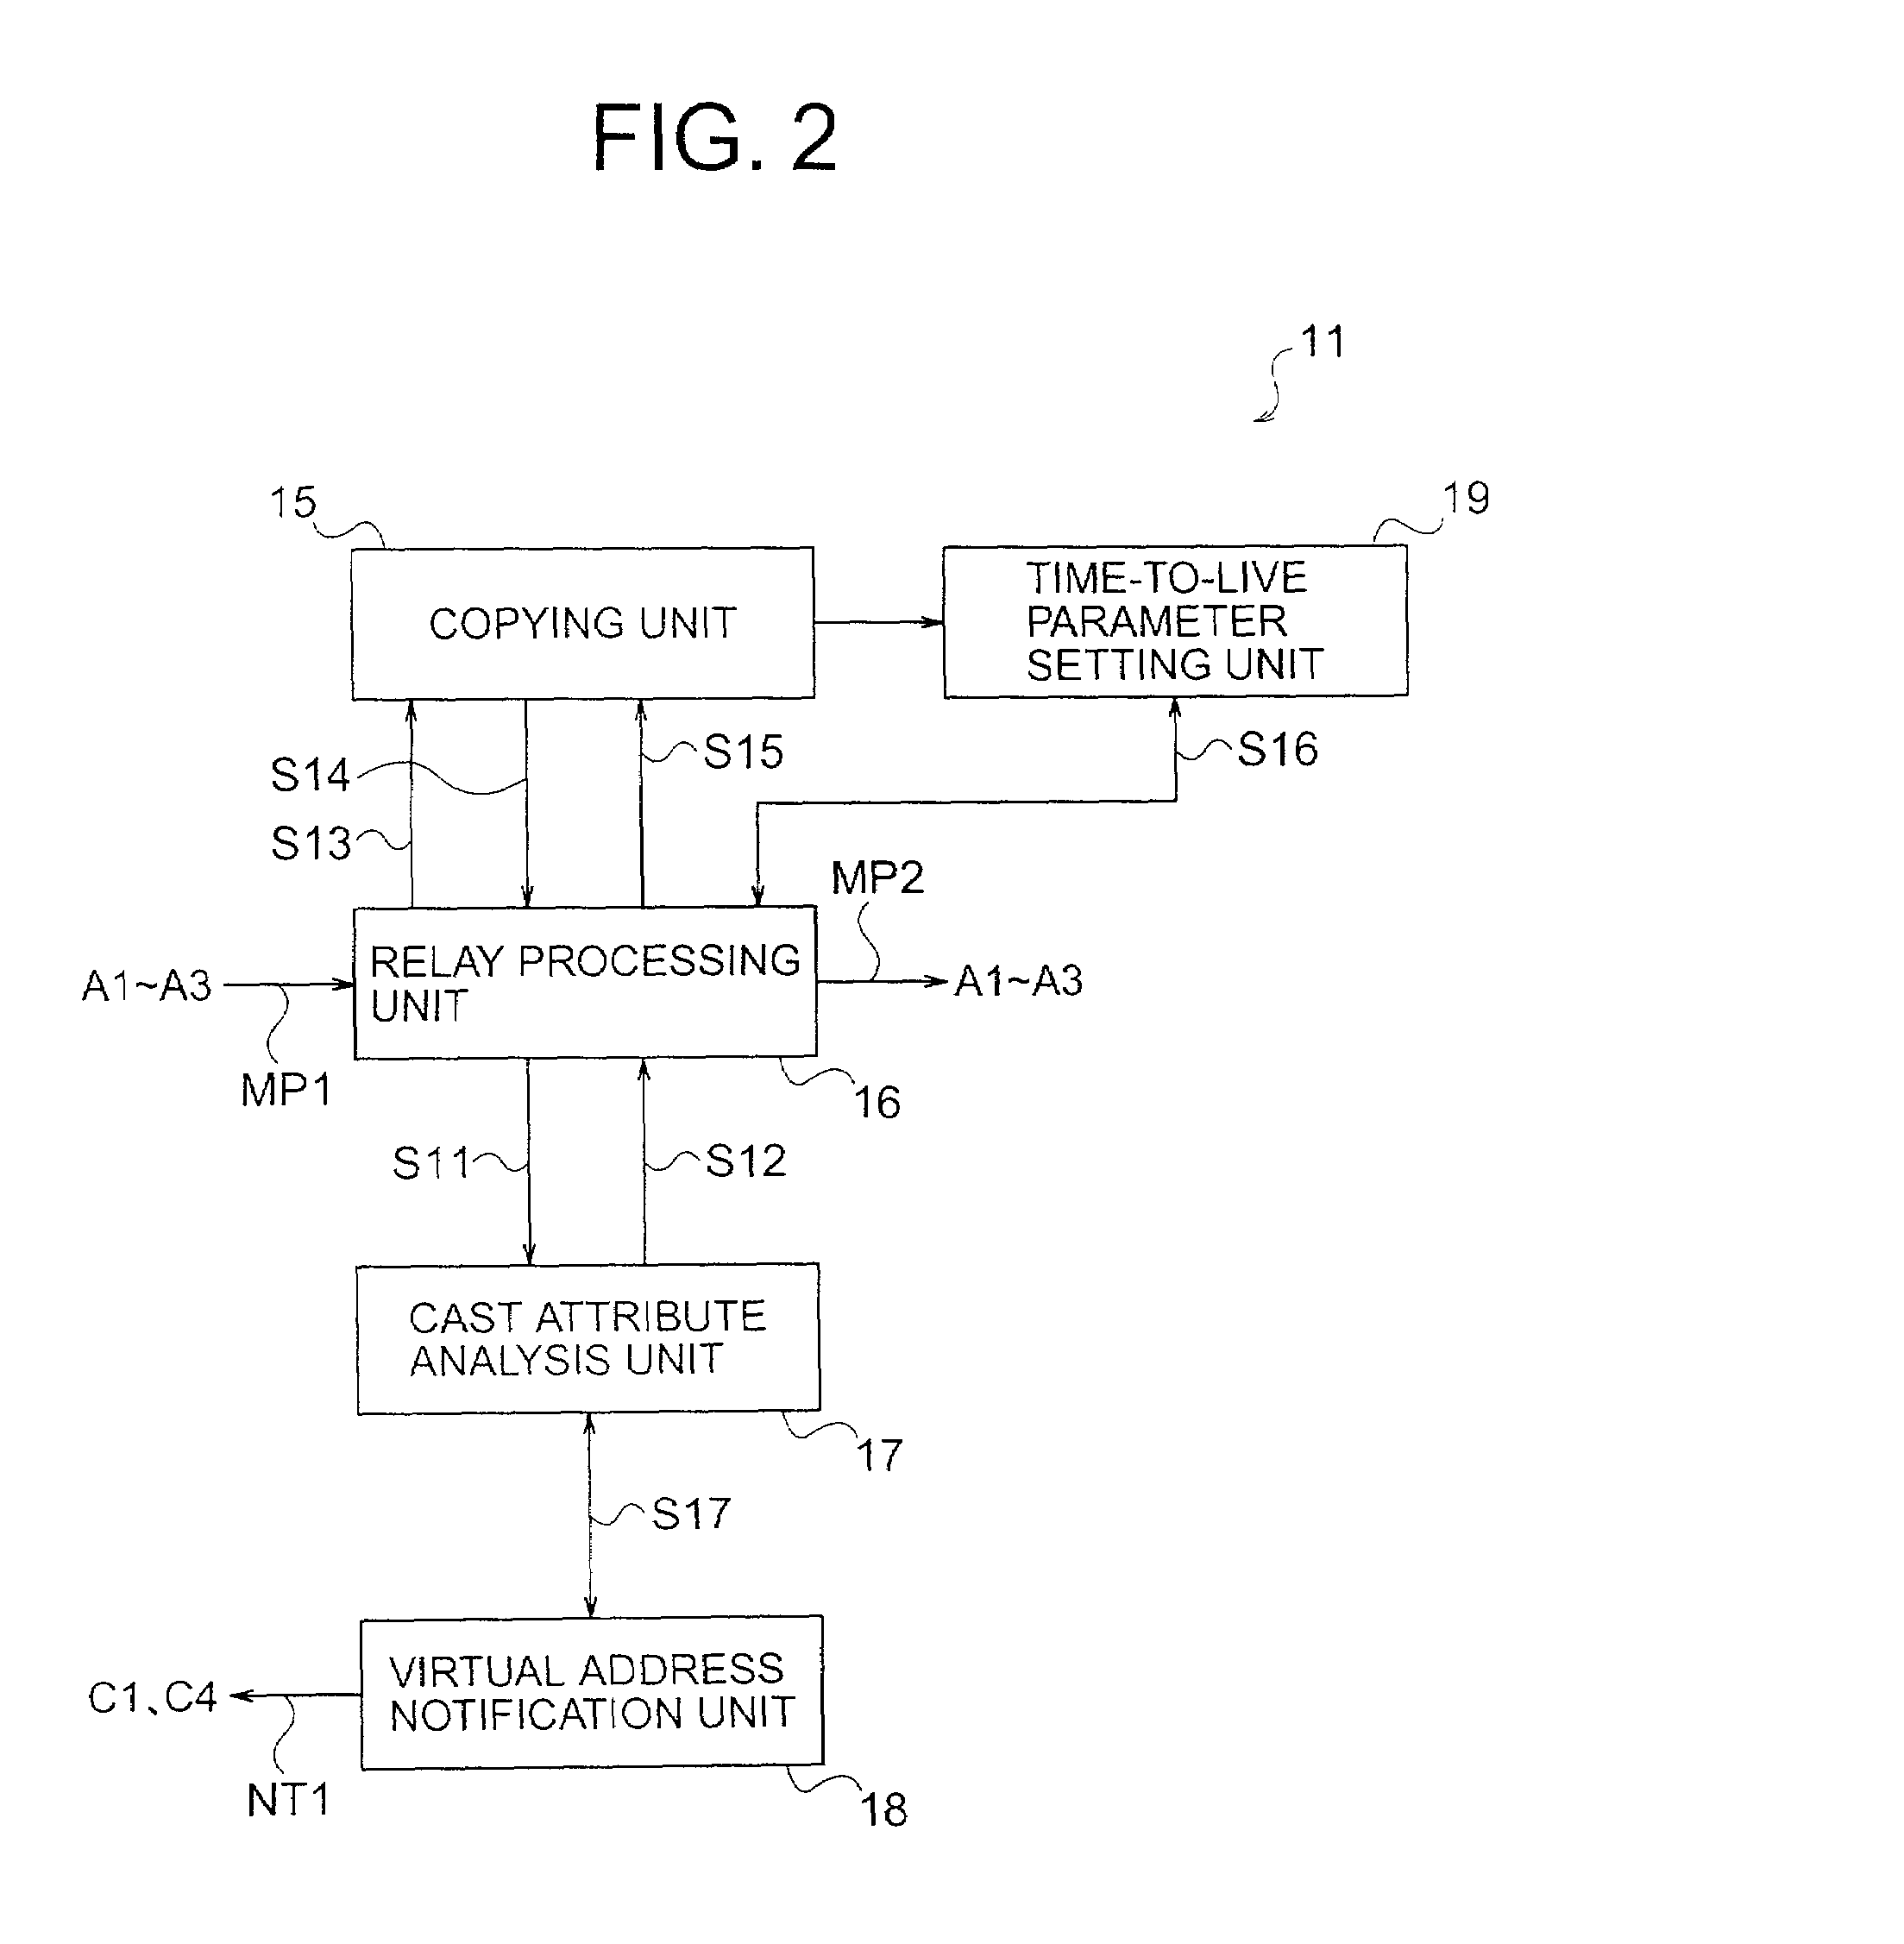 Network communication system with relay node for broadcasts and multicasts